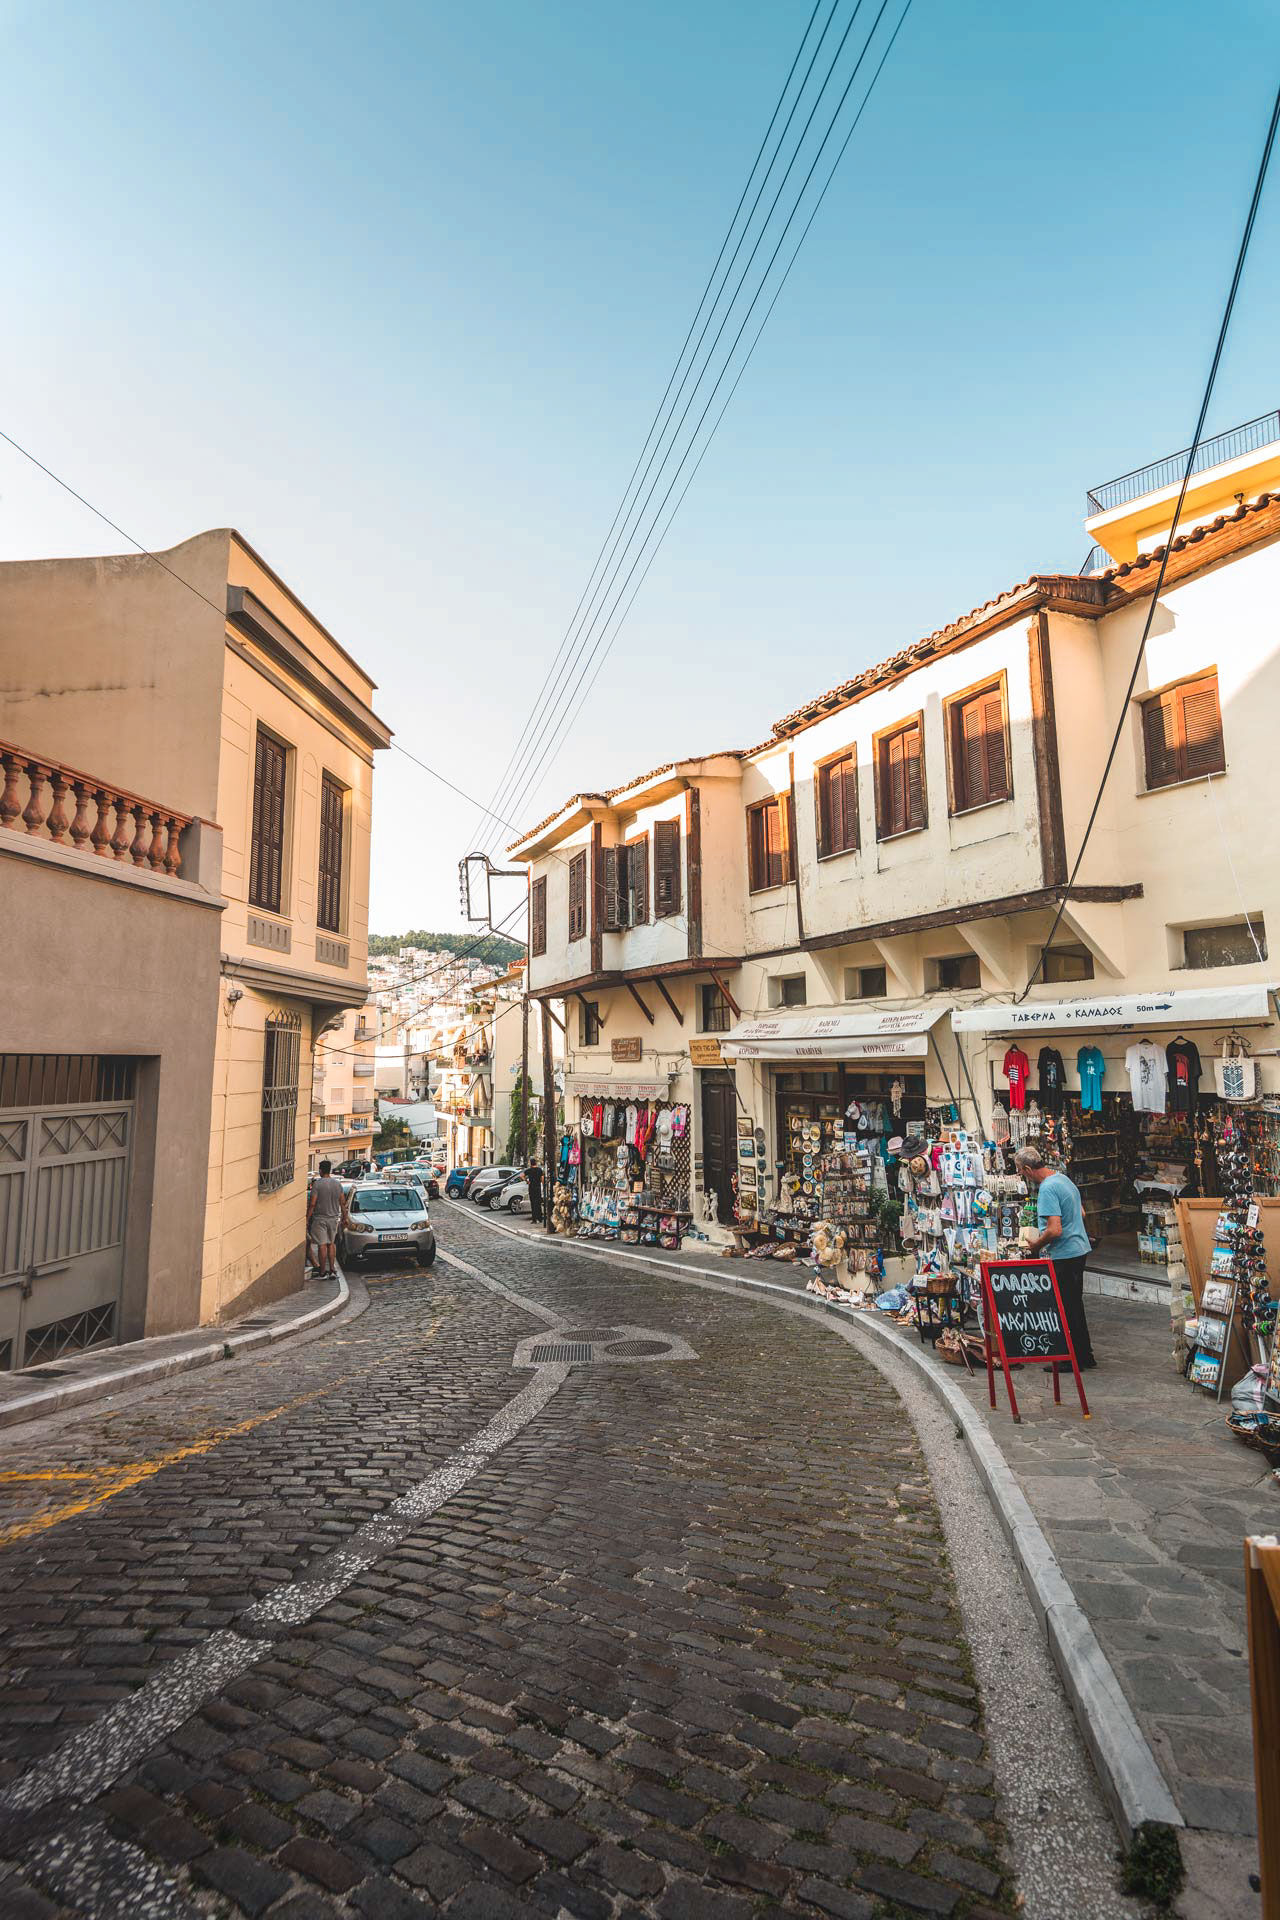 Go time travelling in the Old Town of Kavala